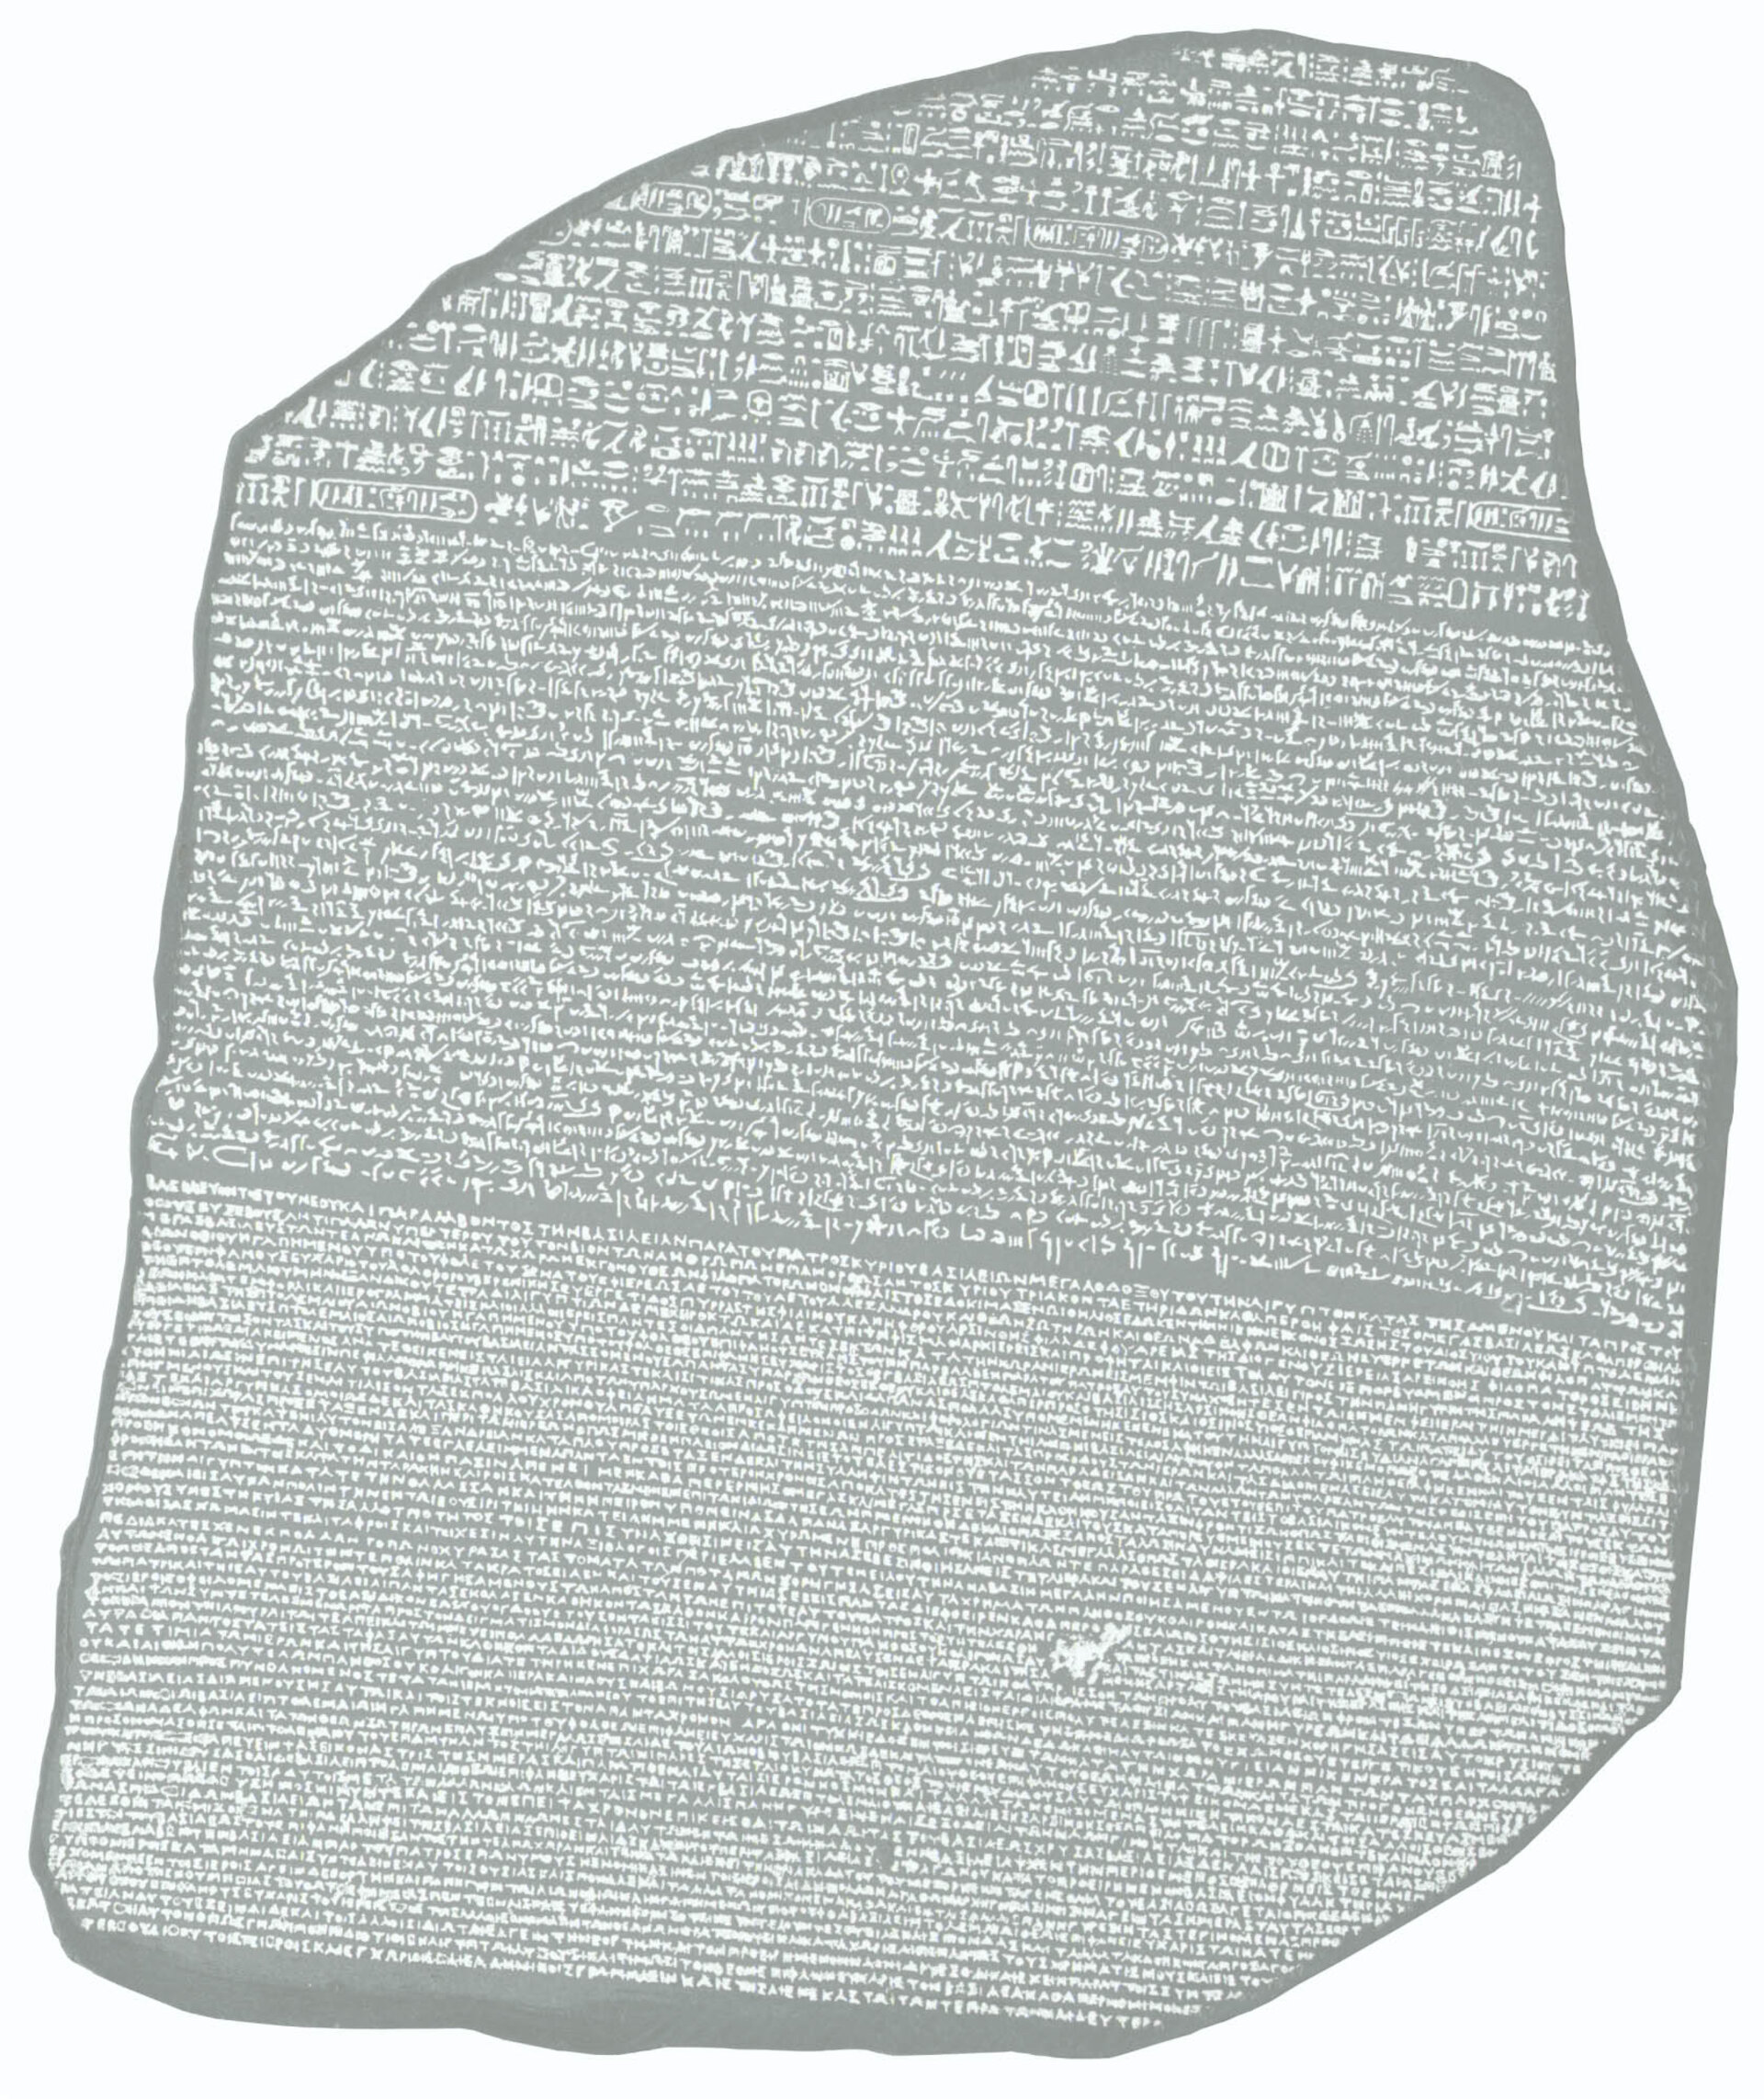 The Rosetta Stone, discovered in 1799